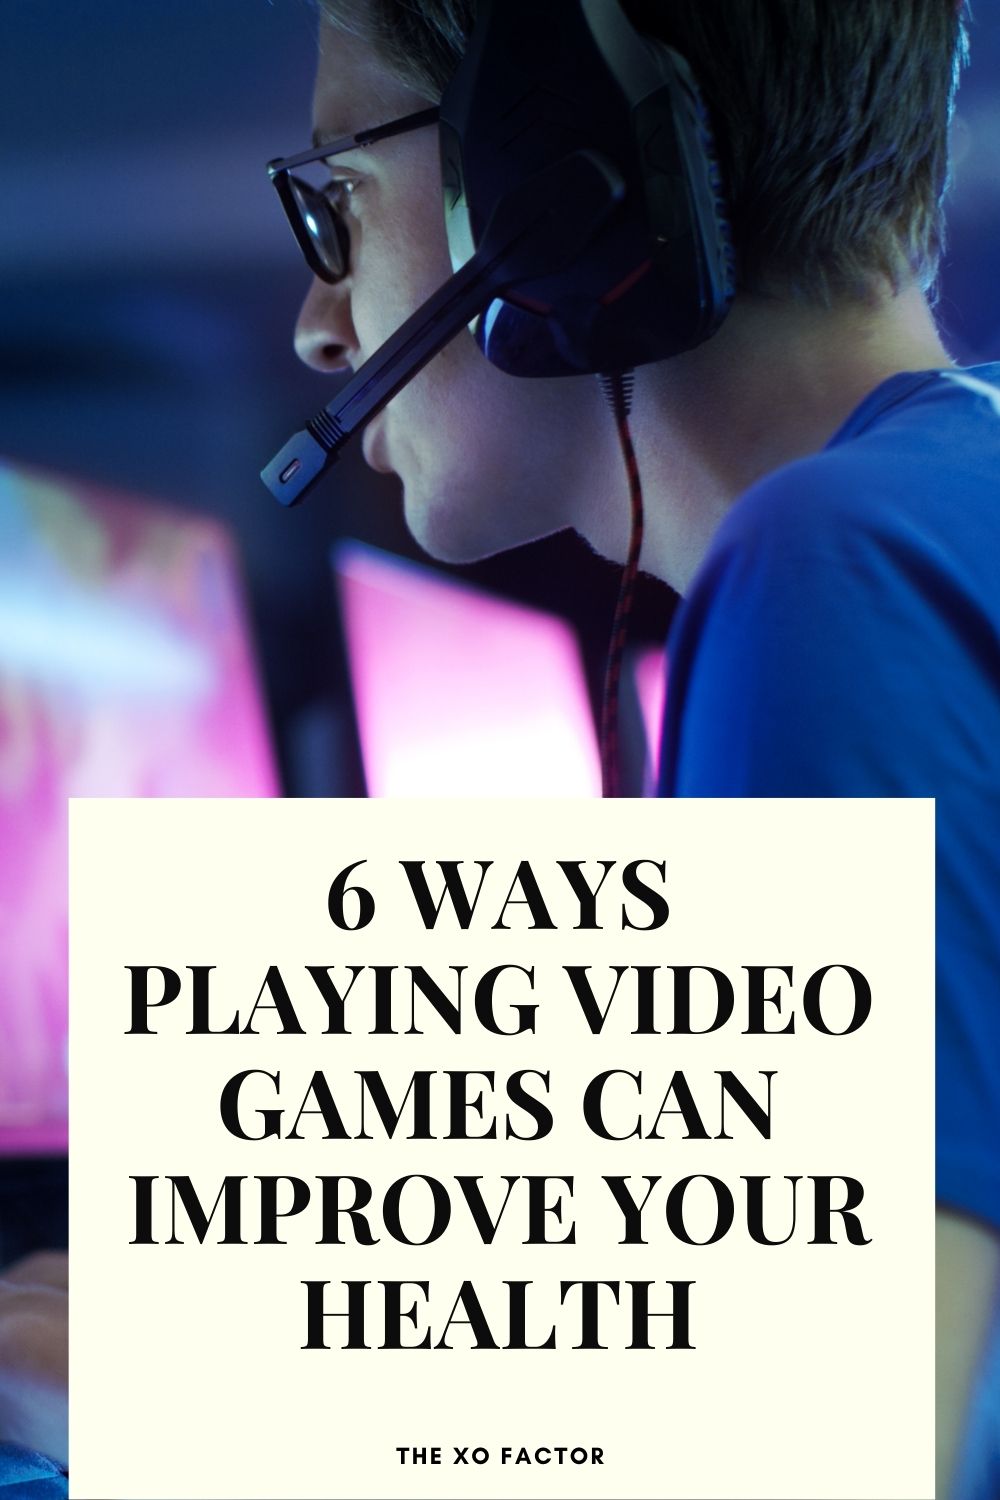 6 ways playing video games can improve your health